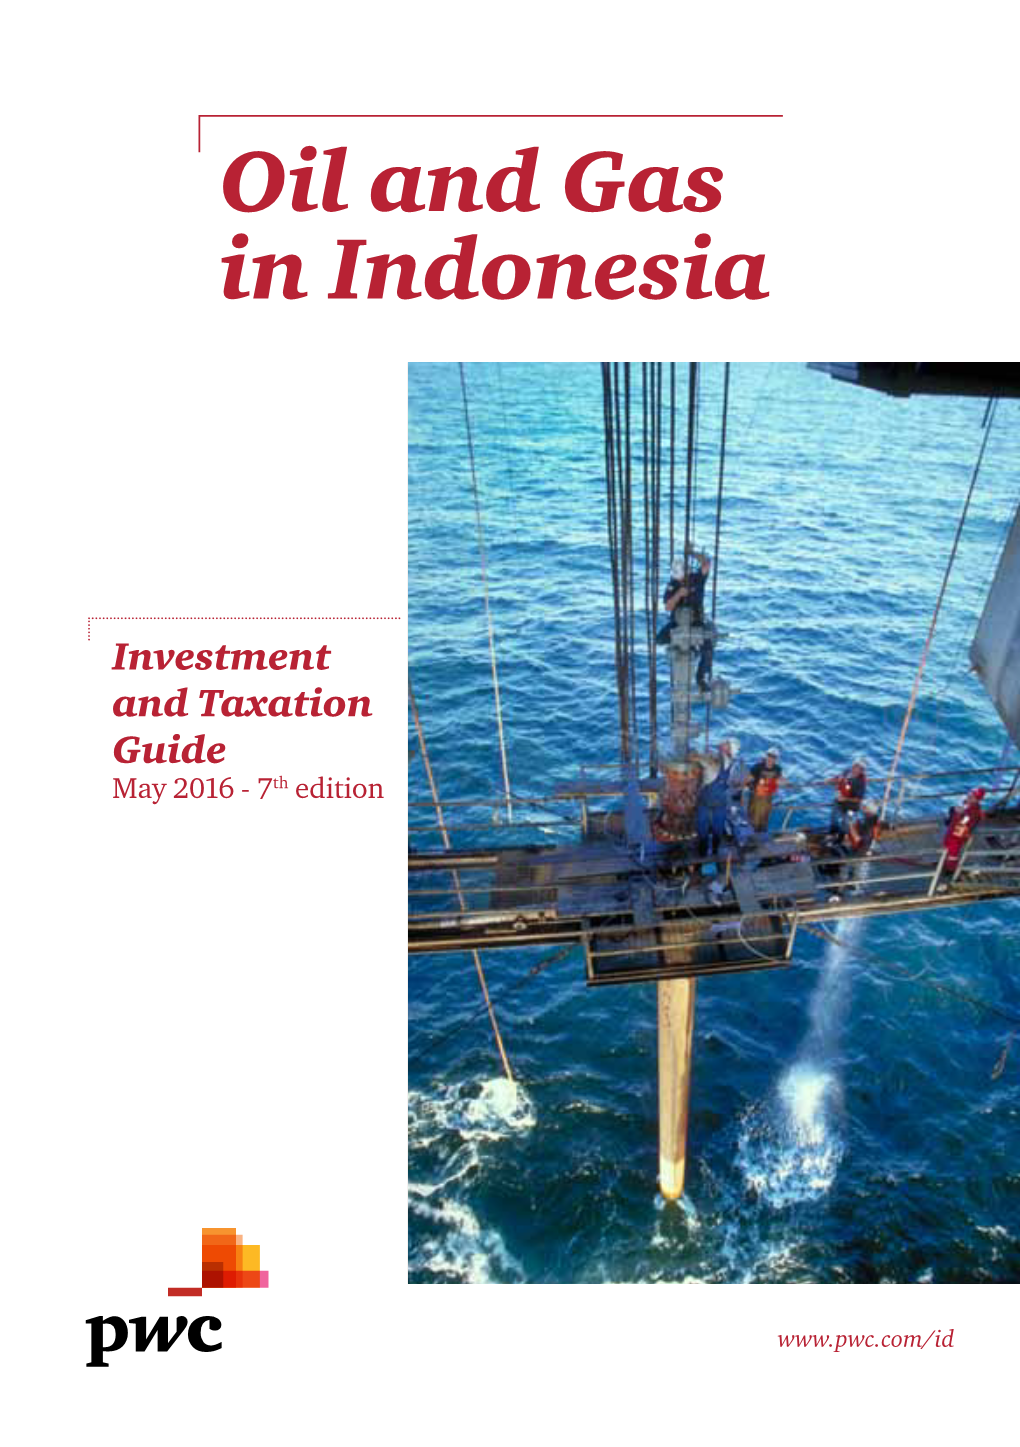 Oil and Gas in Indonesia